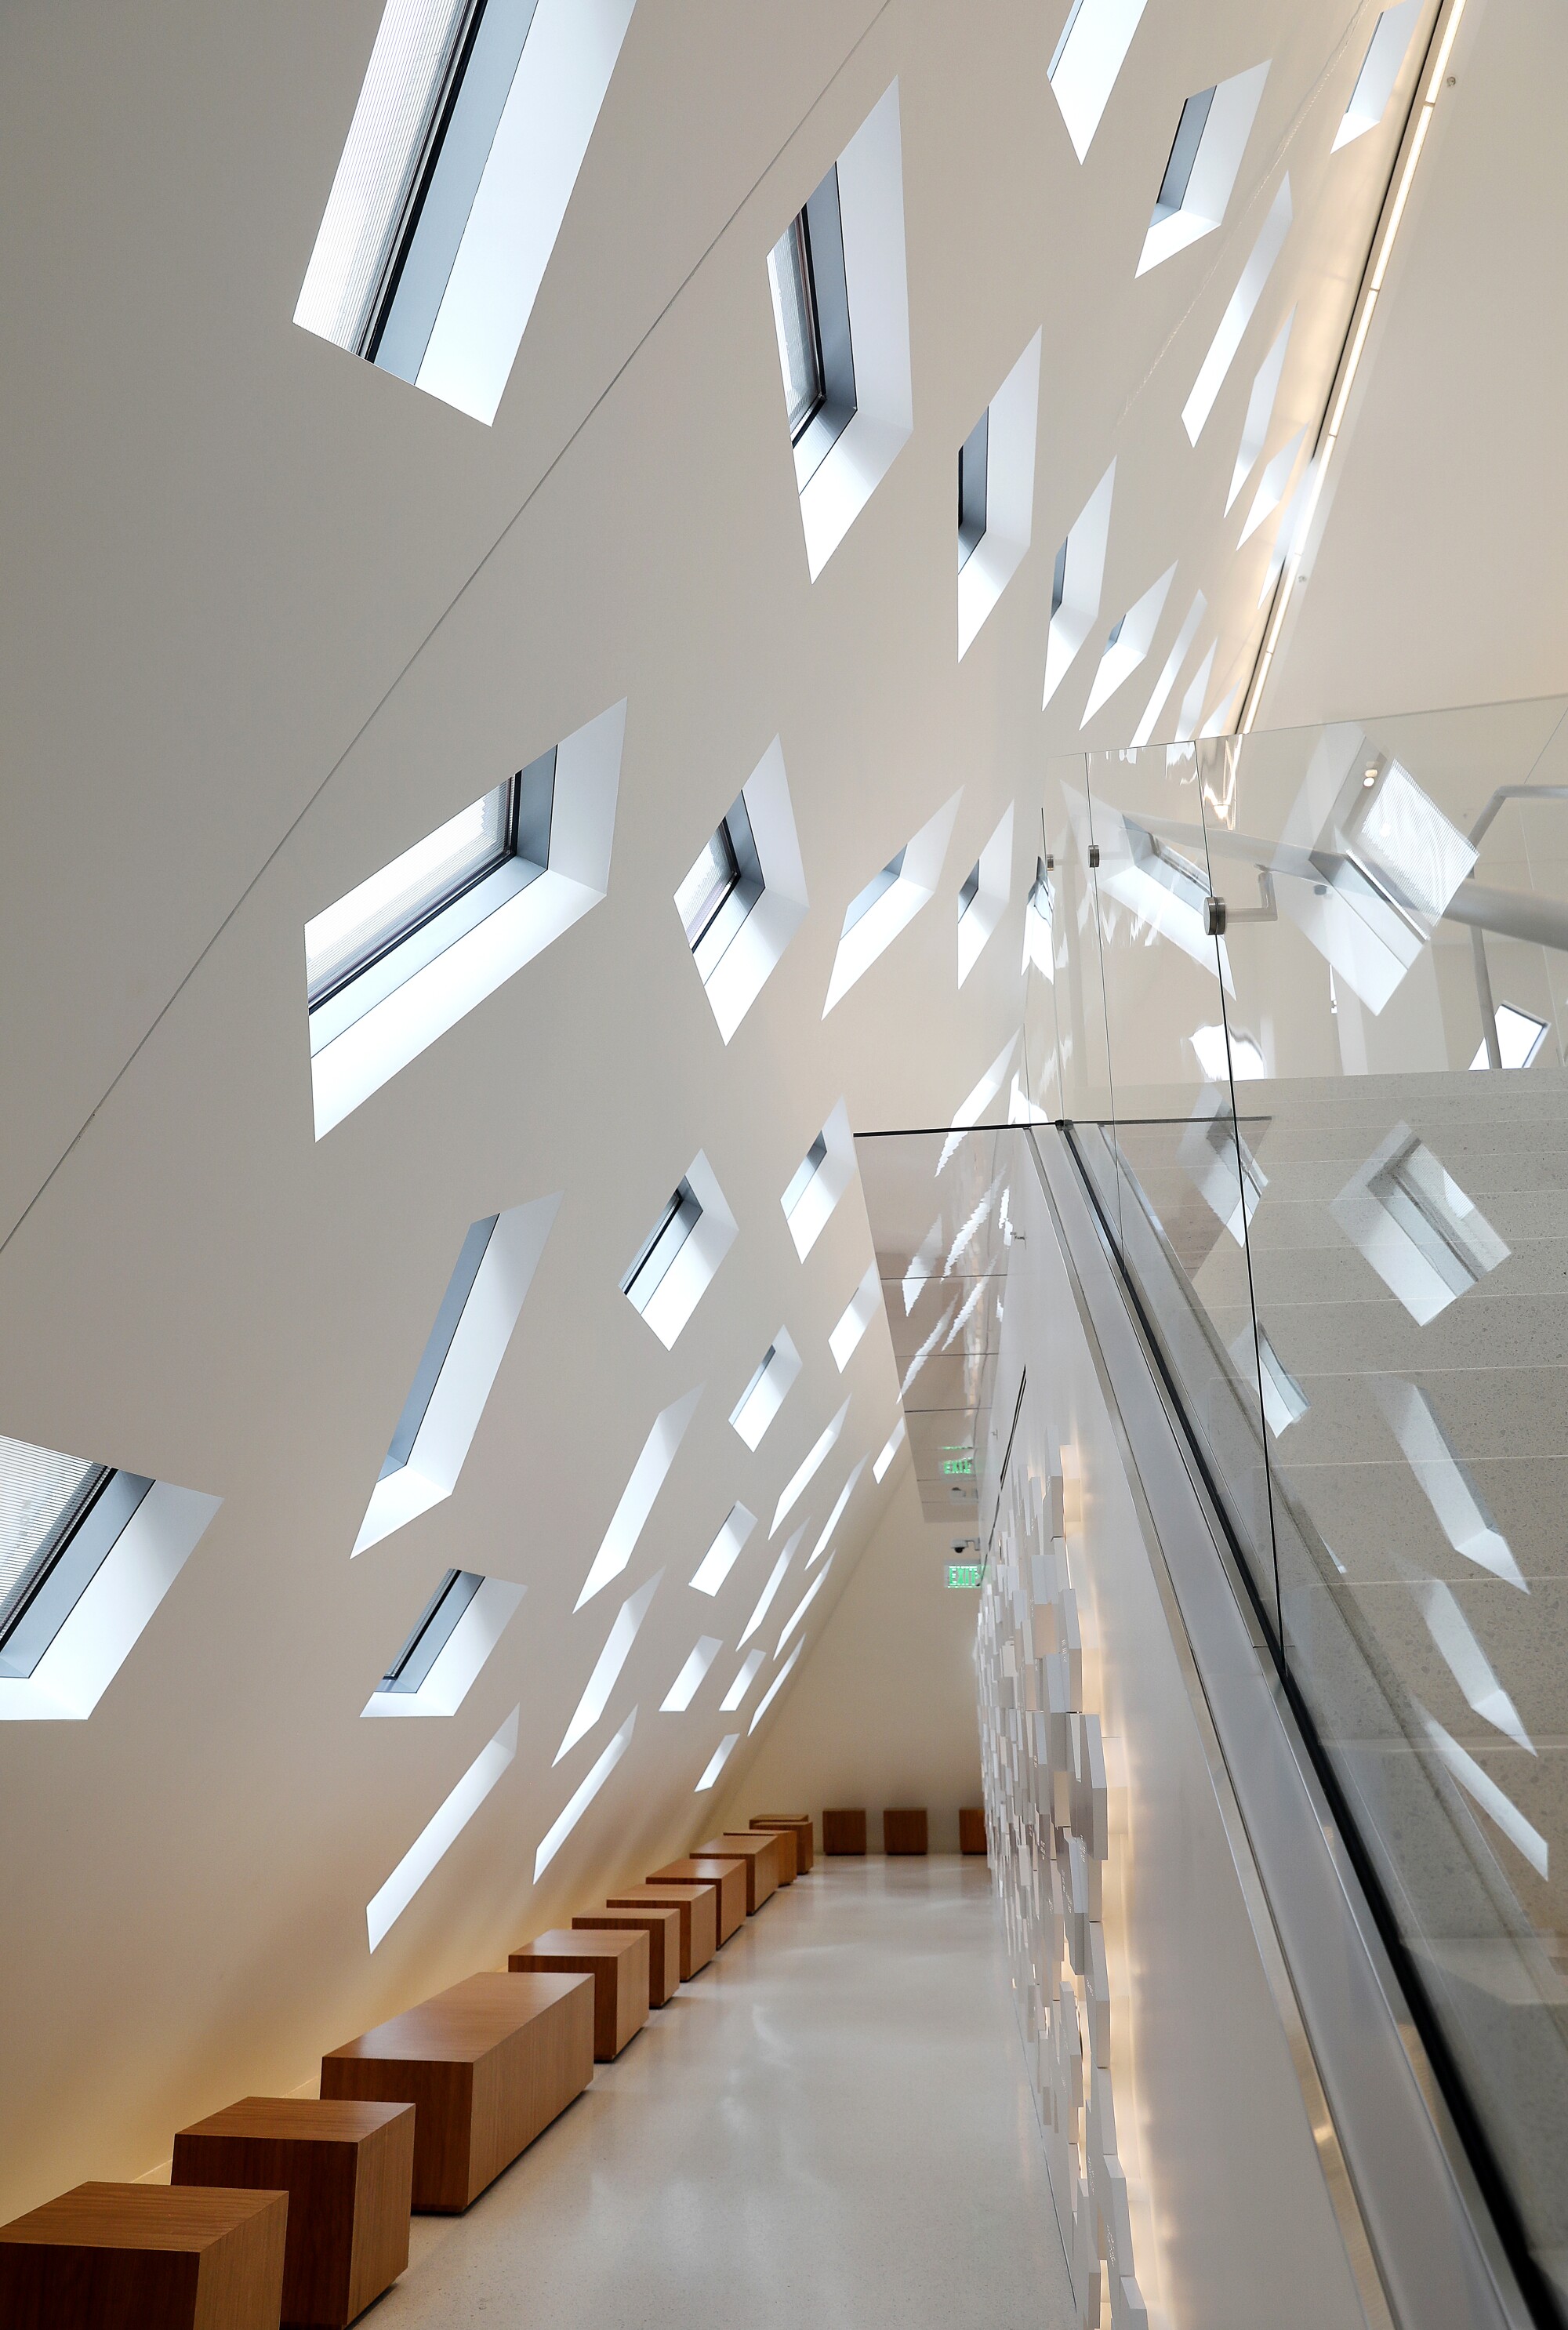 A lobby area features slanted walls punctured by windows at irregular angles